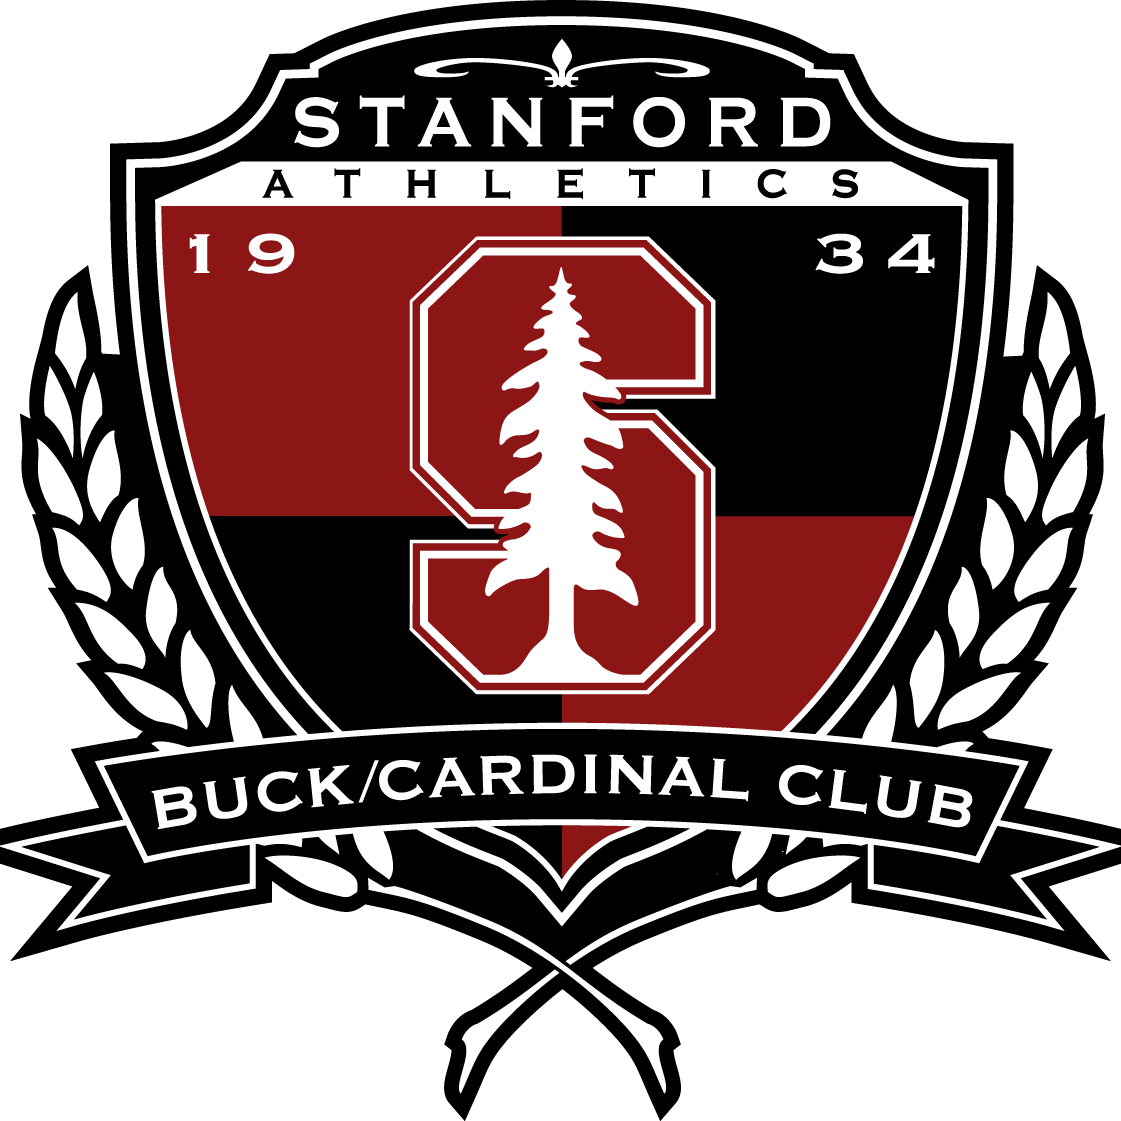 The official twitter for the Buck/Cardinal Club, the annual fund for Stanford Athletics. Updates and info from Stanford Athletics.